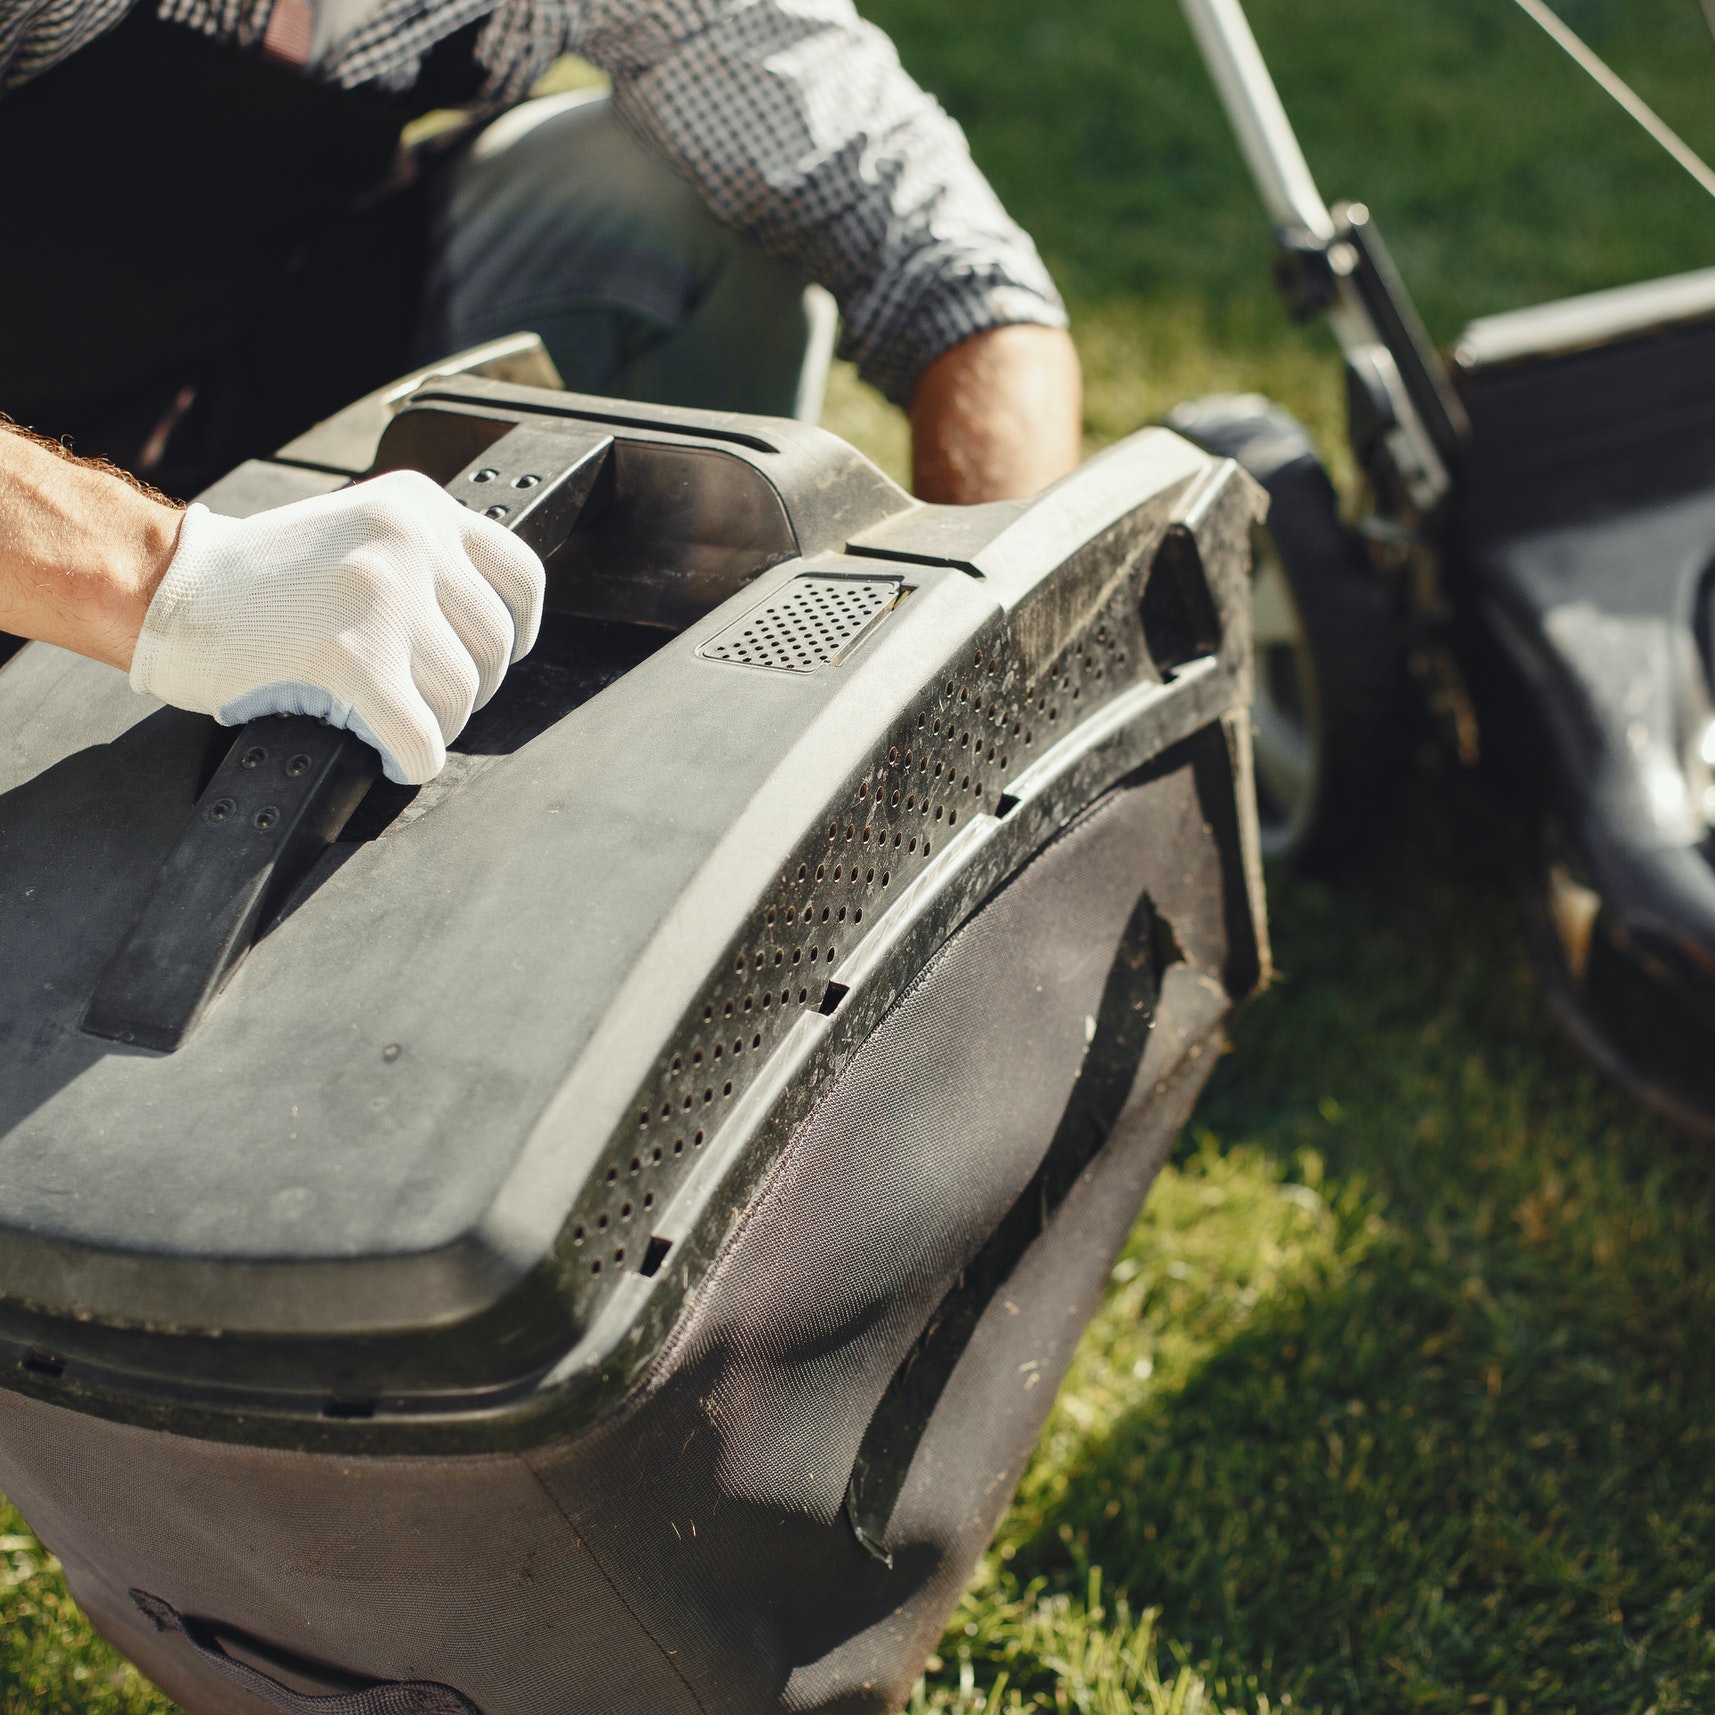 A man inspects a lawnmower before repairing it